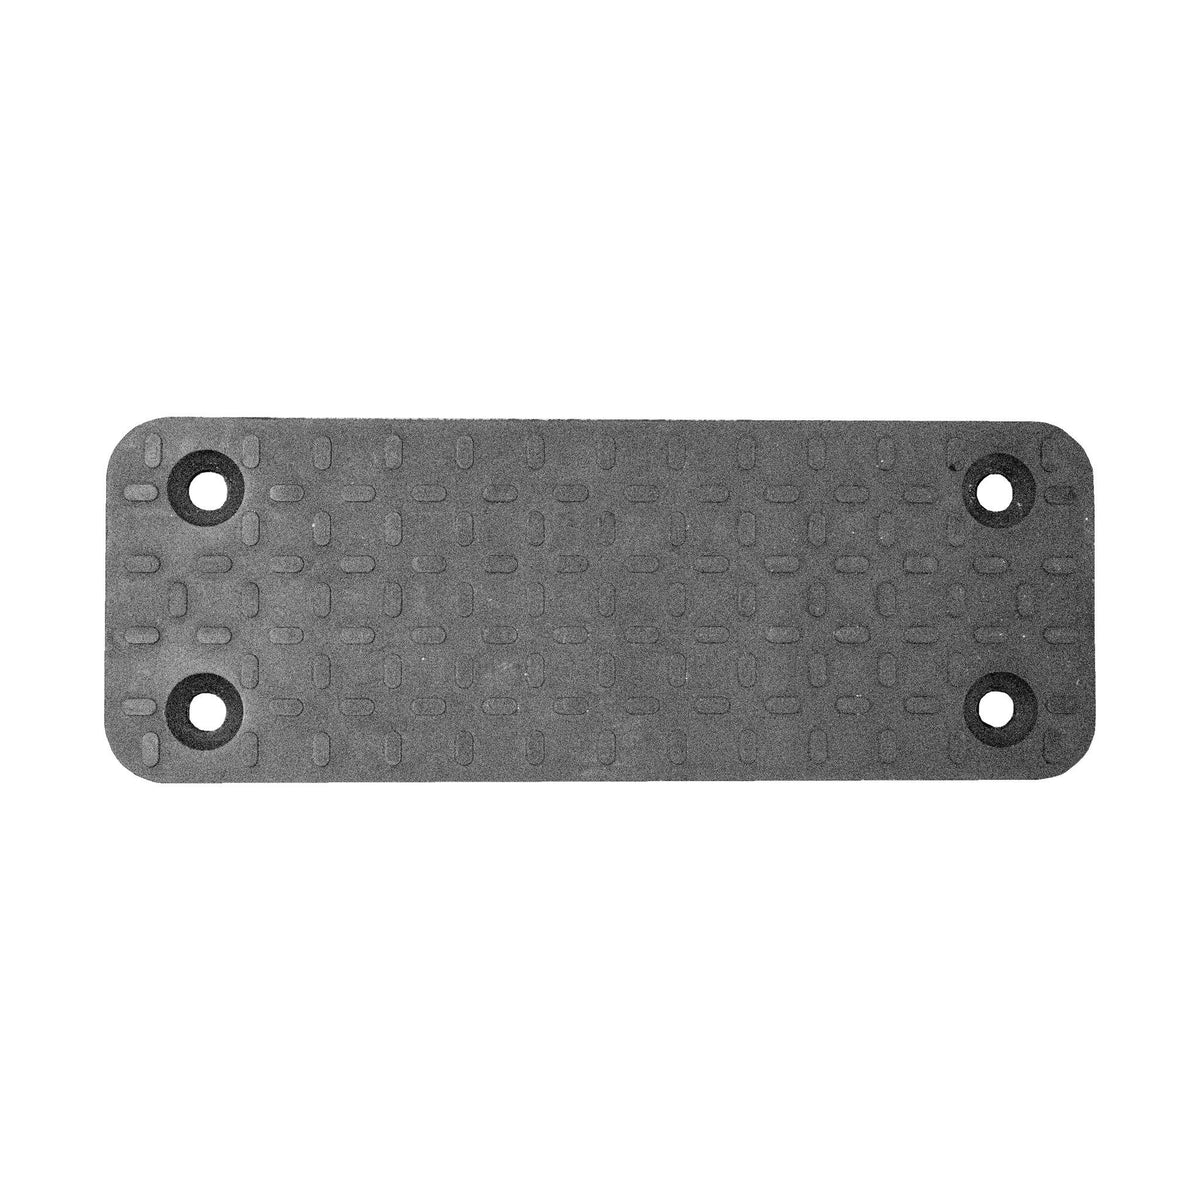 Accessories - Tracker MAG-45 Gun Magnet - Holds 45 Pounds